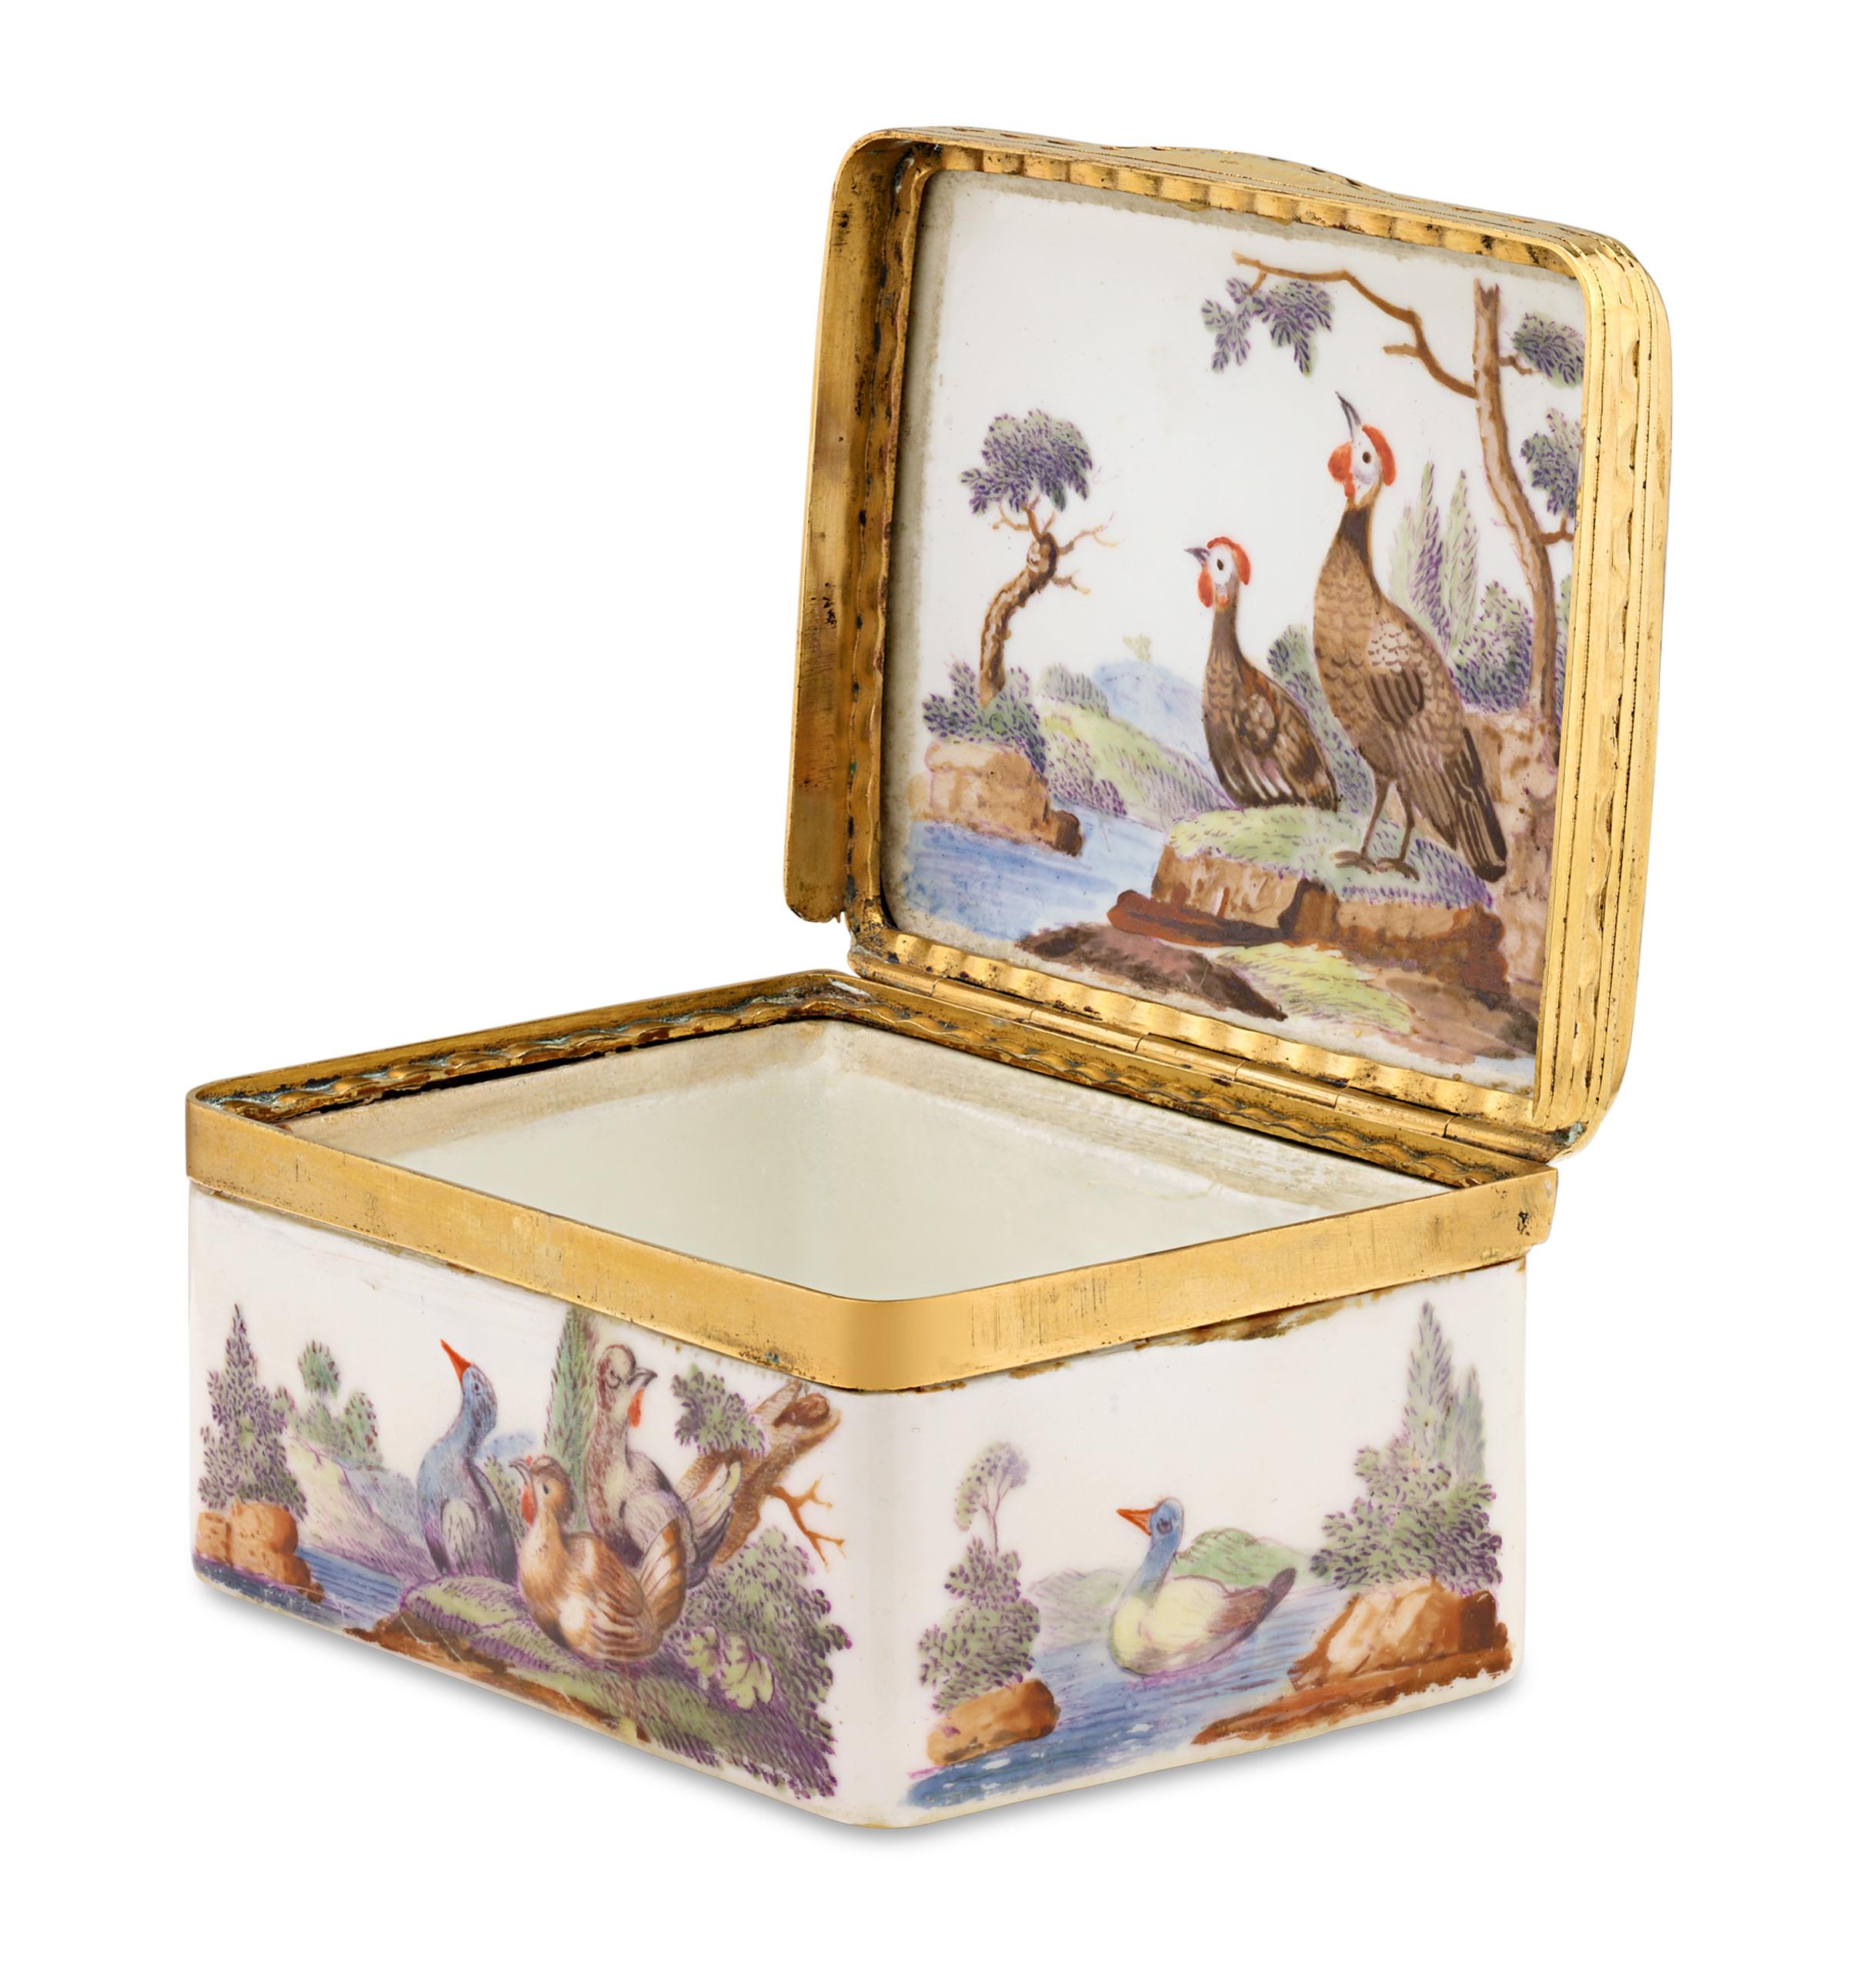 This important German porcelain box exhibits delightful artistry and craftsmanship. Its hand-painted wild game scene celebrates the natural world, while bronze gilt and 16k gold mountings beautifully complement the vibrant colors and intricate